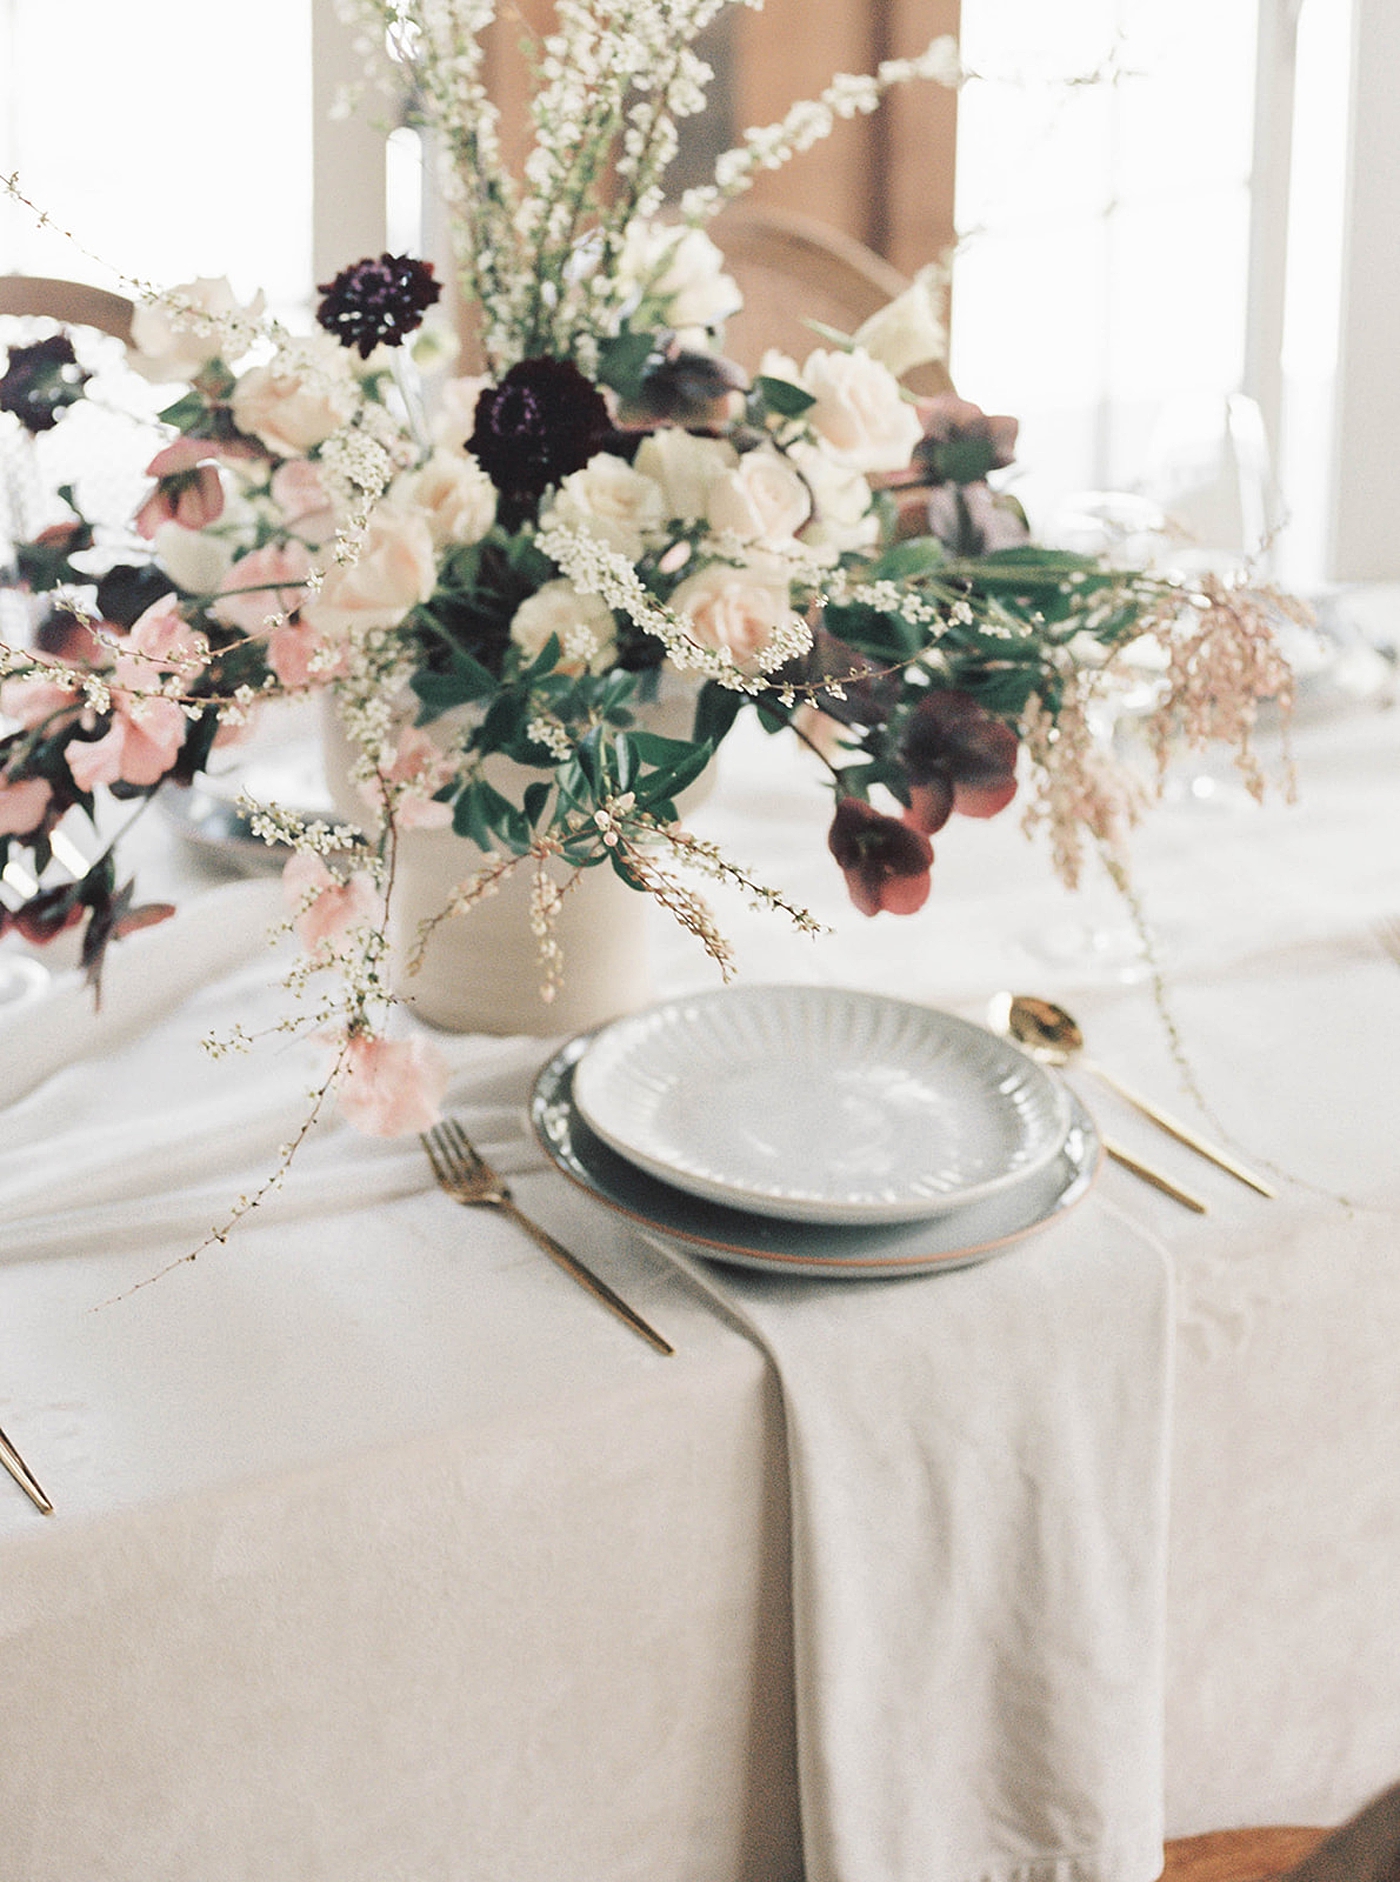 Wedding table with place setting | Carters Event Co